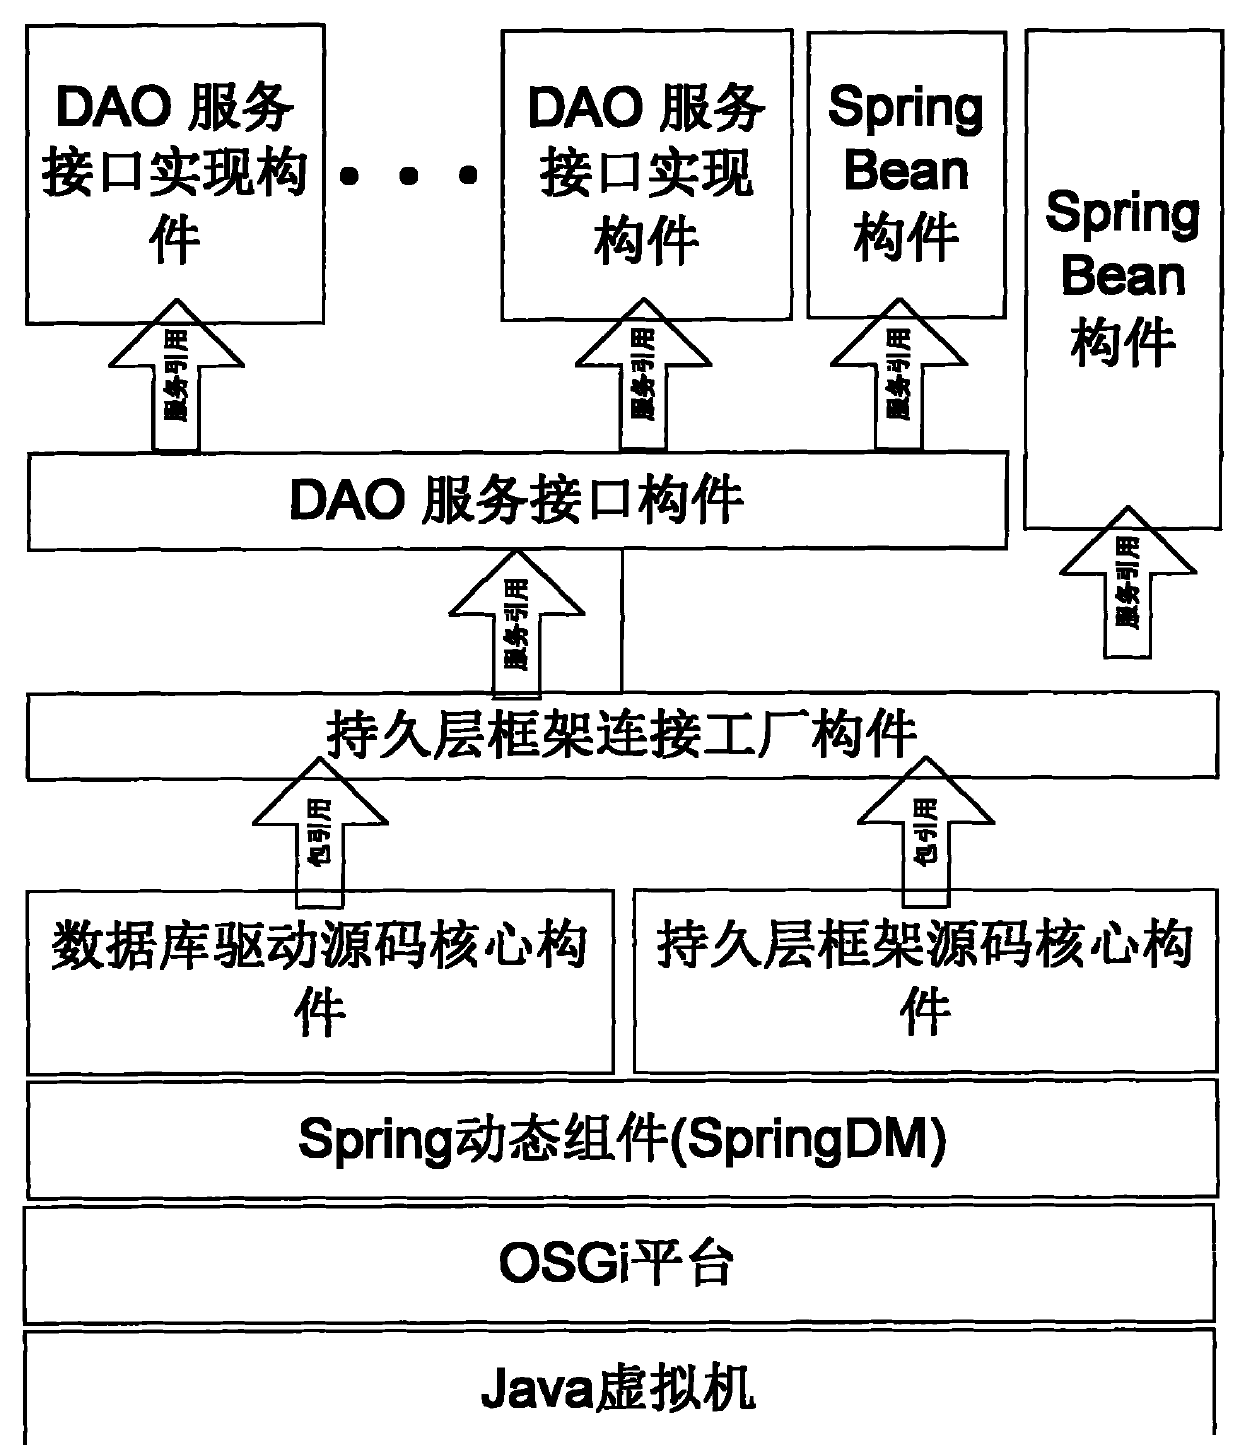 Dynamic model based on SpringDM and application thereof to persistence layer of RFID (Radio Frequency Identification) middleware